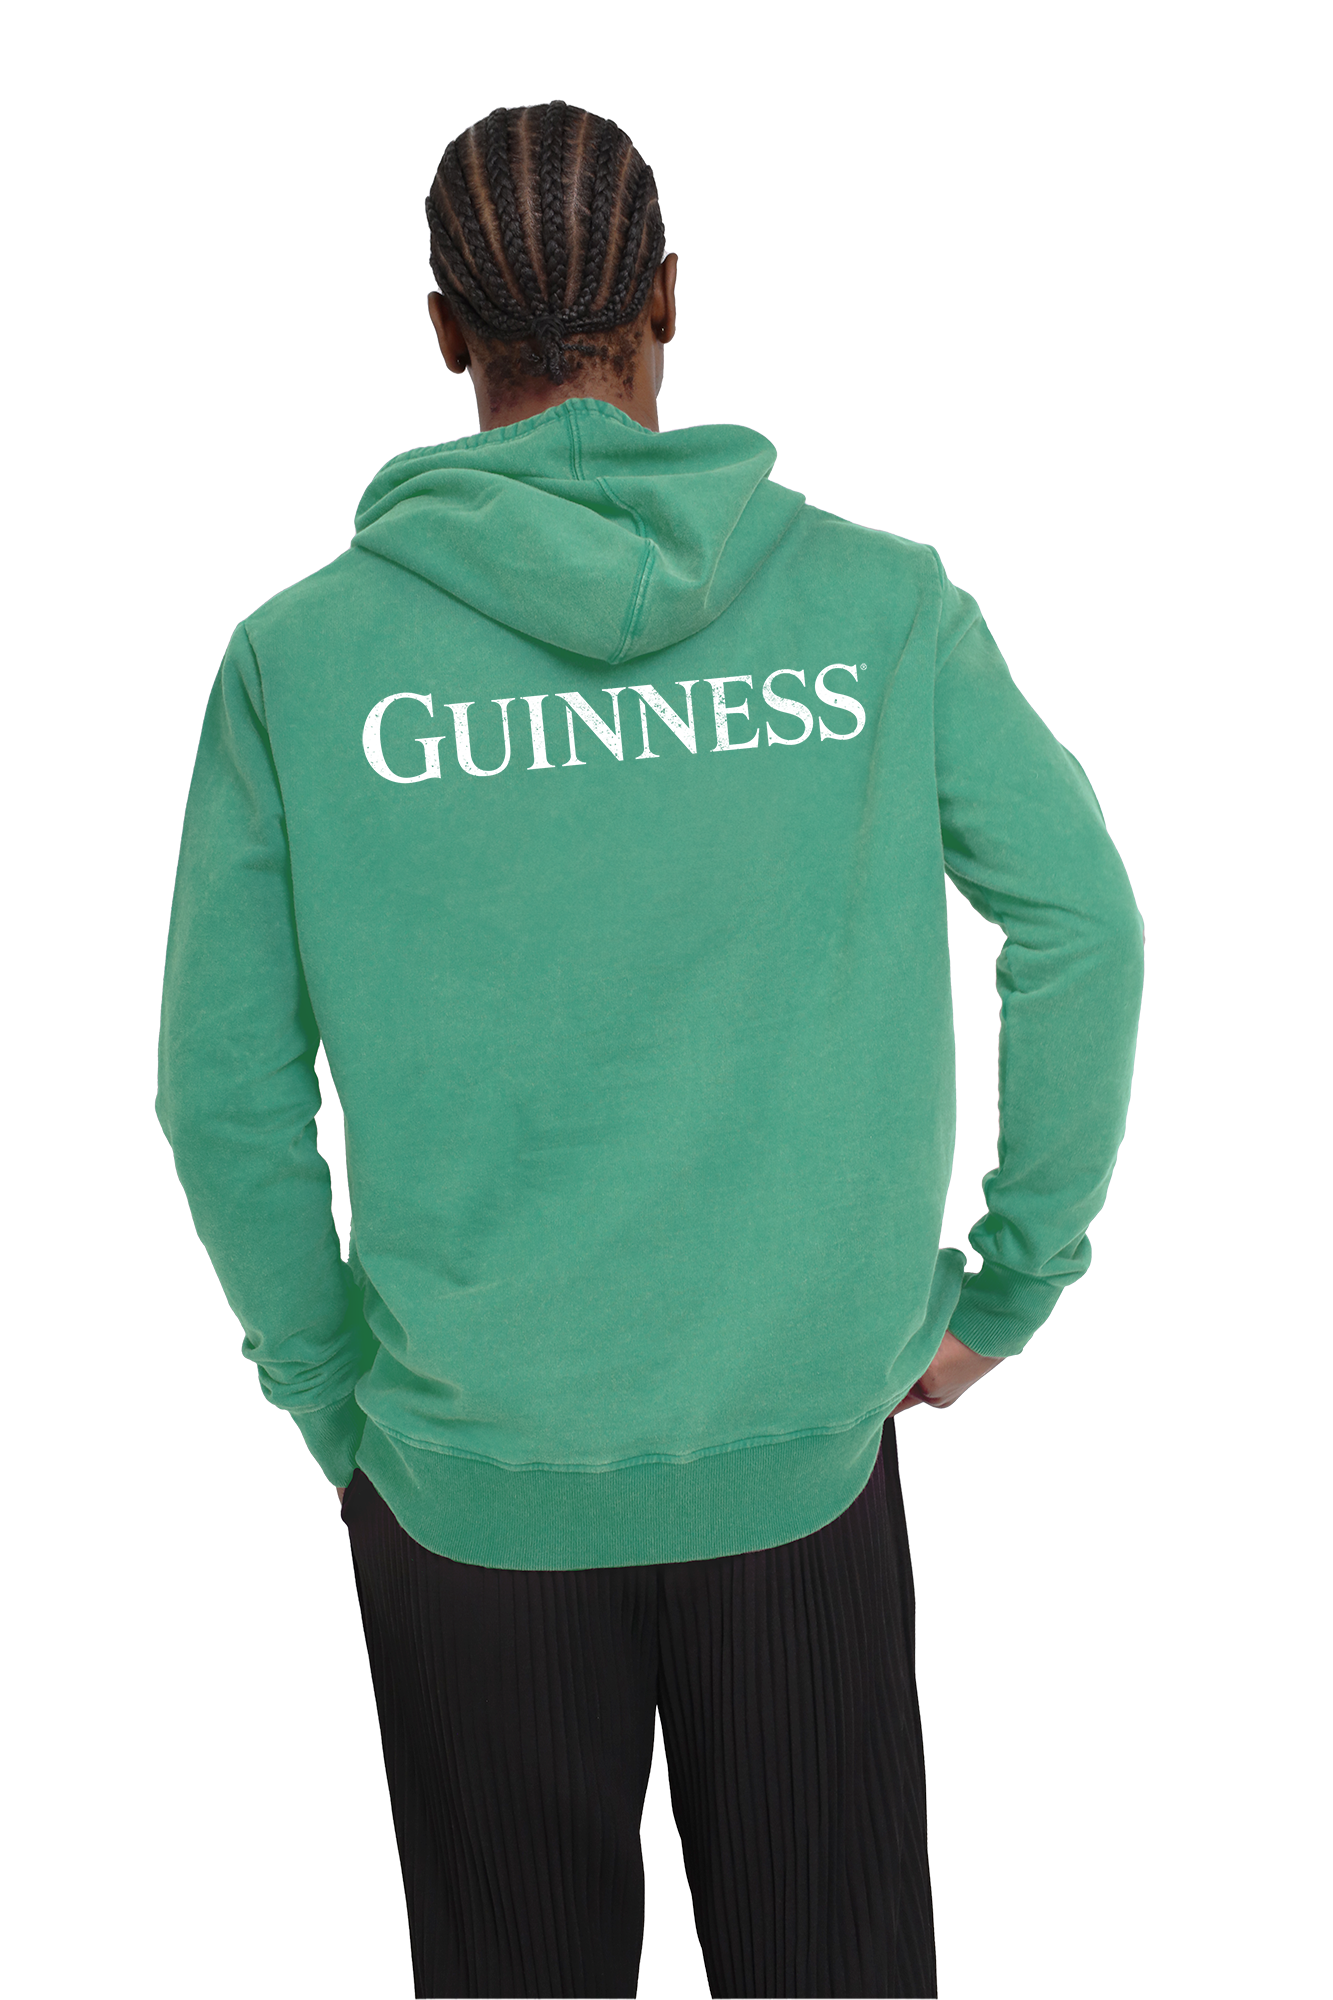 A man is seen wearing a green Guinness Evolution Harp Green Hoodie made from BCI cotton, showcasing his support for sustainable fashion.